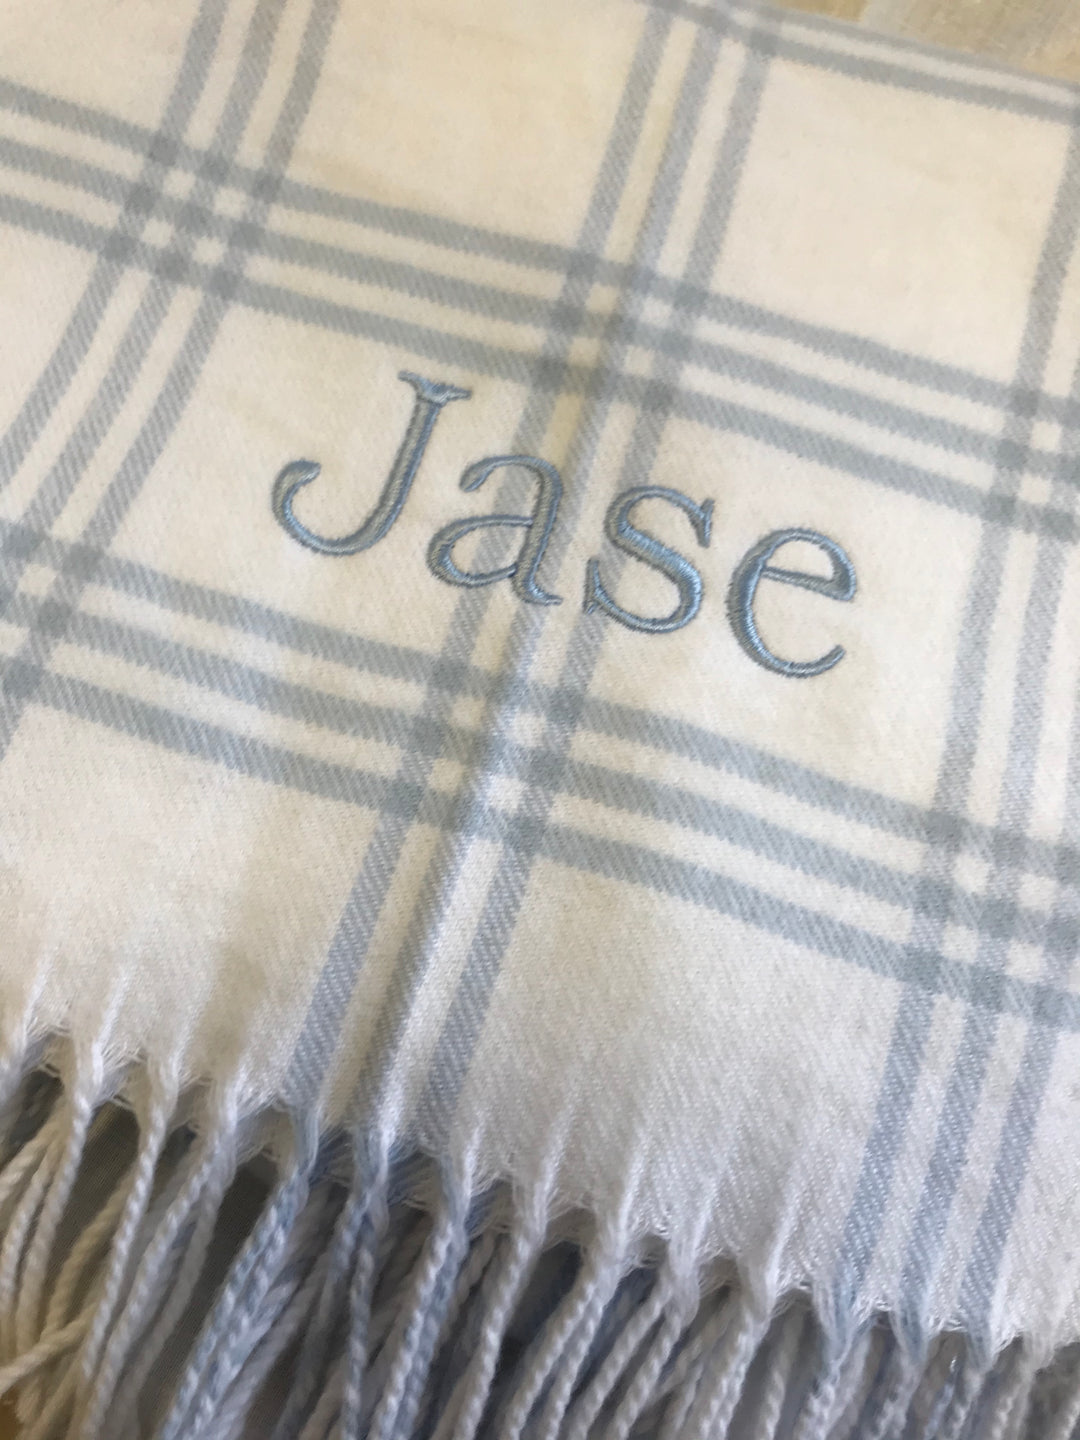 Windowpane Check Flannel Blanket with Fringe